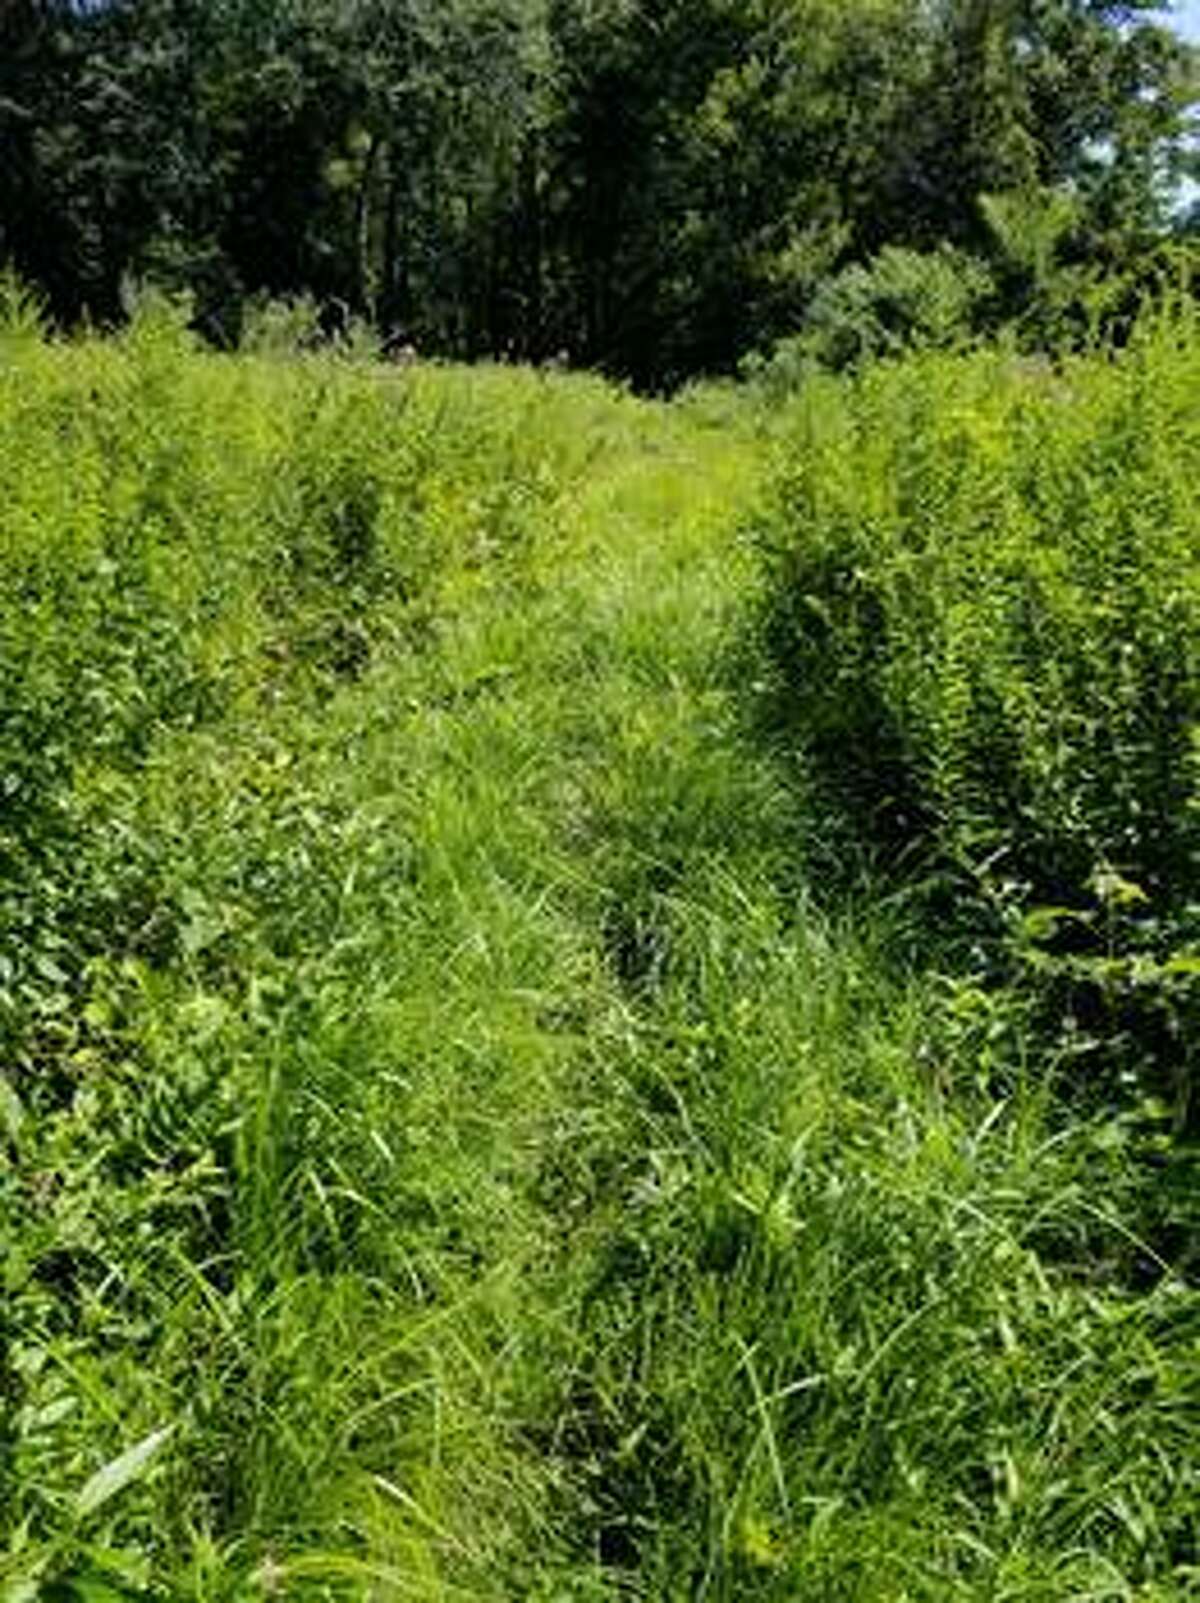 The Shelton Trails Committee will be hosting its next work party Saturday, Aug. 24, beginning at 8:30 a.m. along Paugussett Trail at Constitution Avenue North.